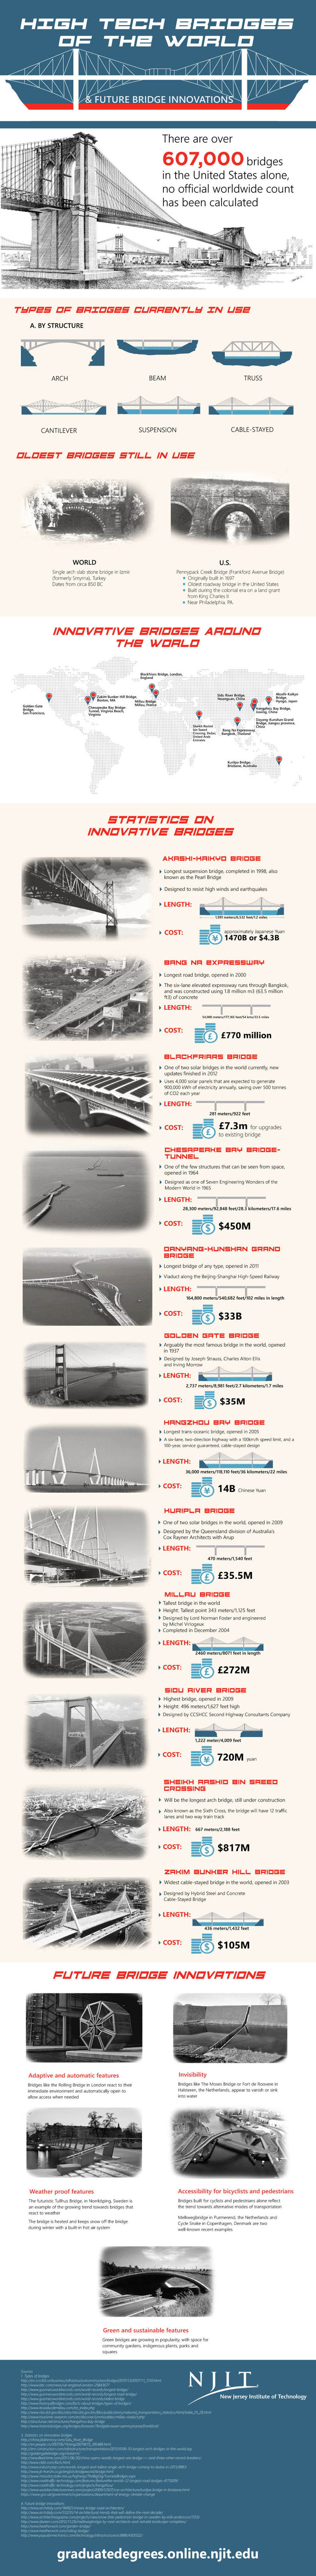 12 of The Best Bridges in the World - Engineering Infographic